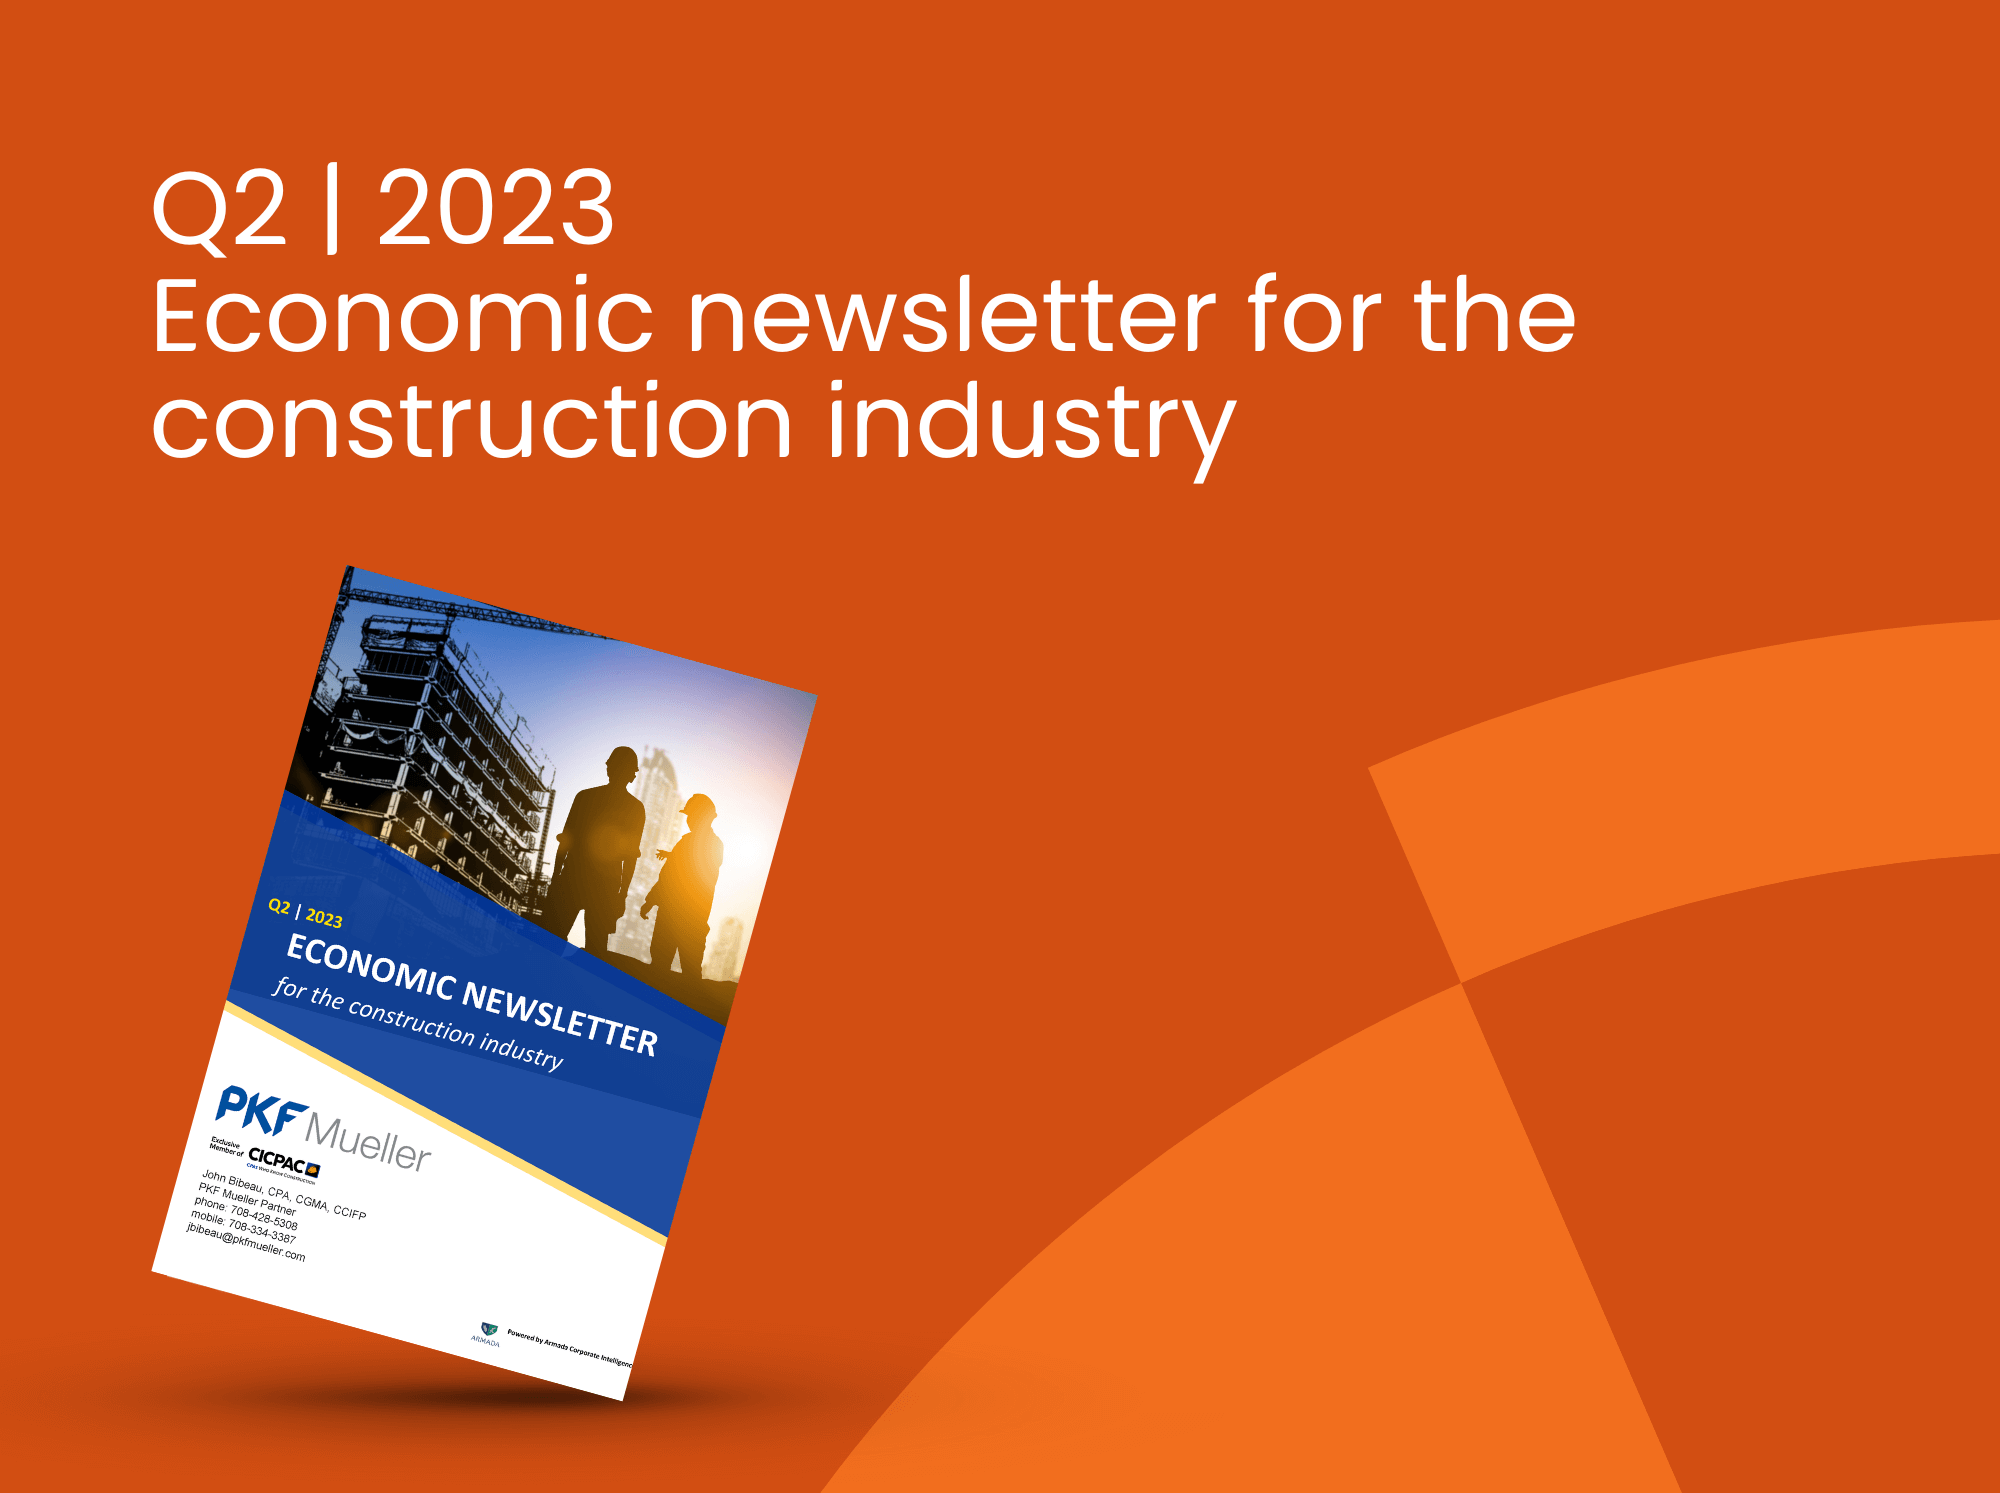 Q2 | 2023 Economic newsletter for the construction industry